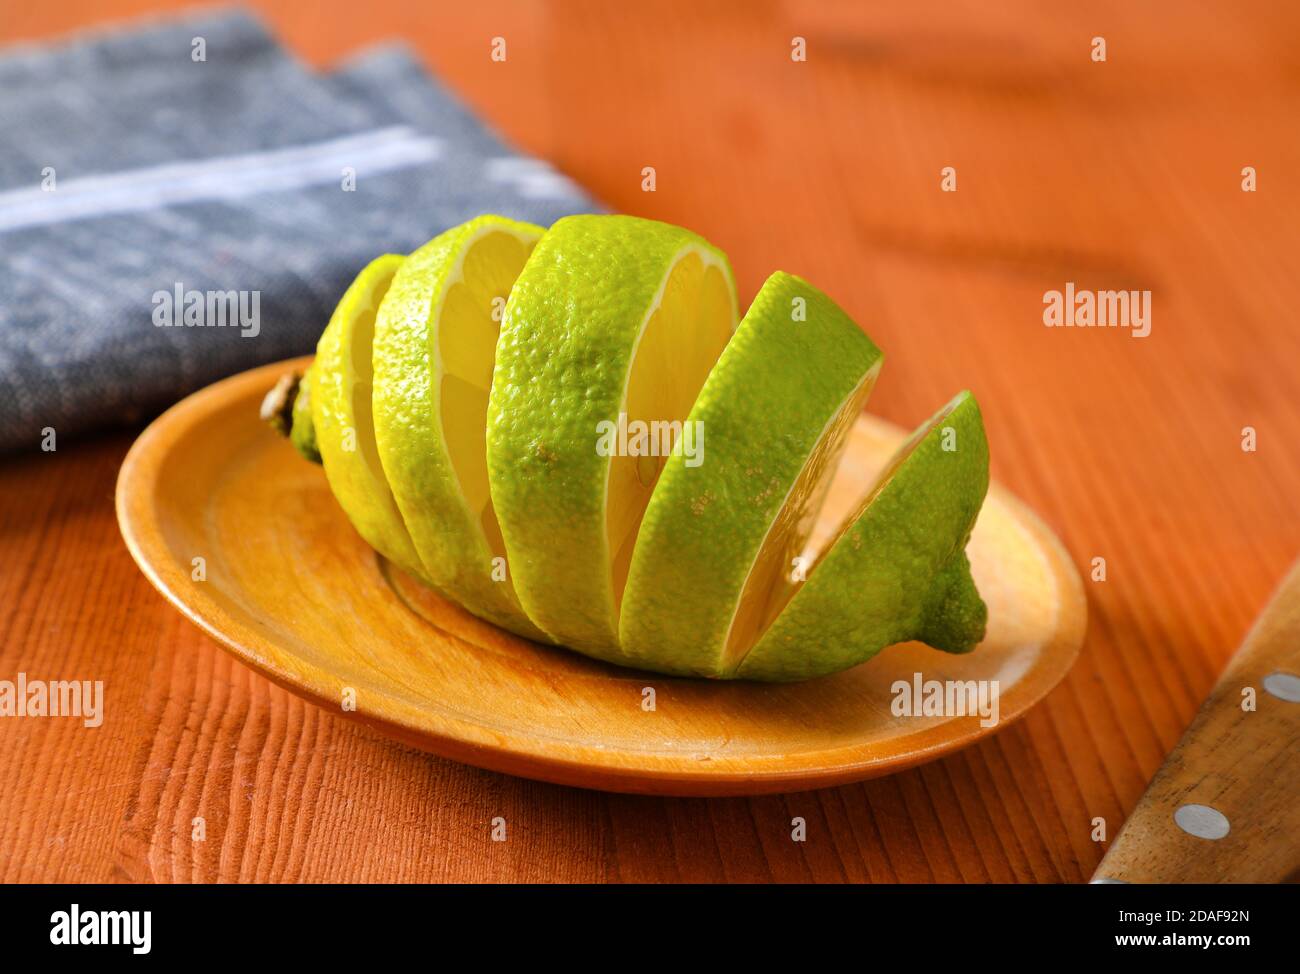 Lemon with green peel and yellow flesh, sliced on wooden plate Stock Photo